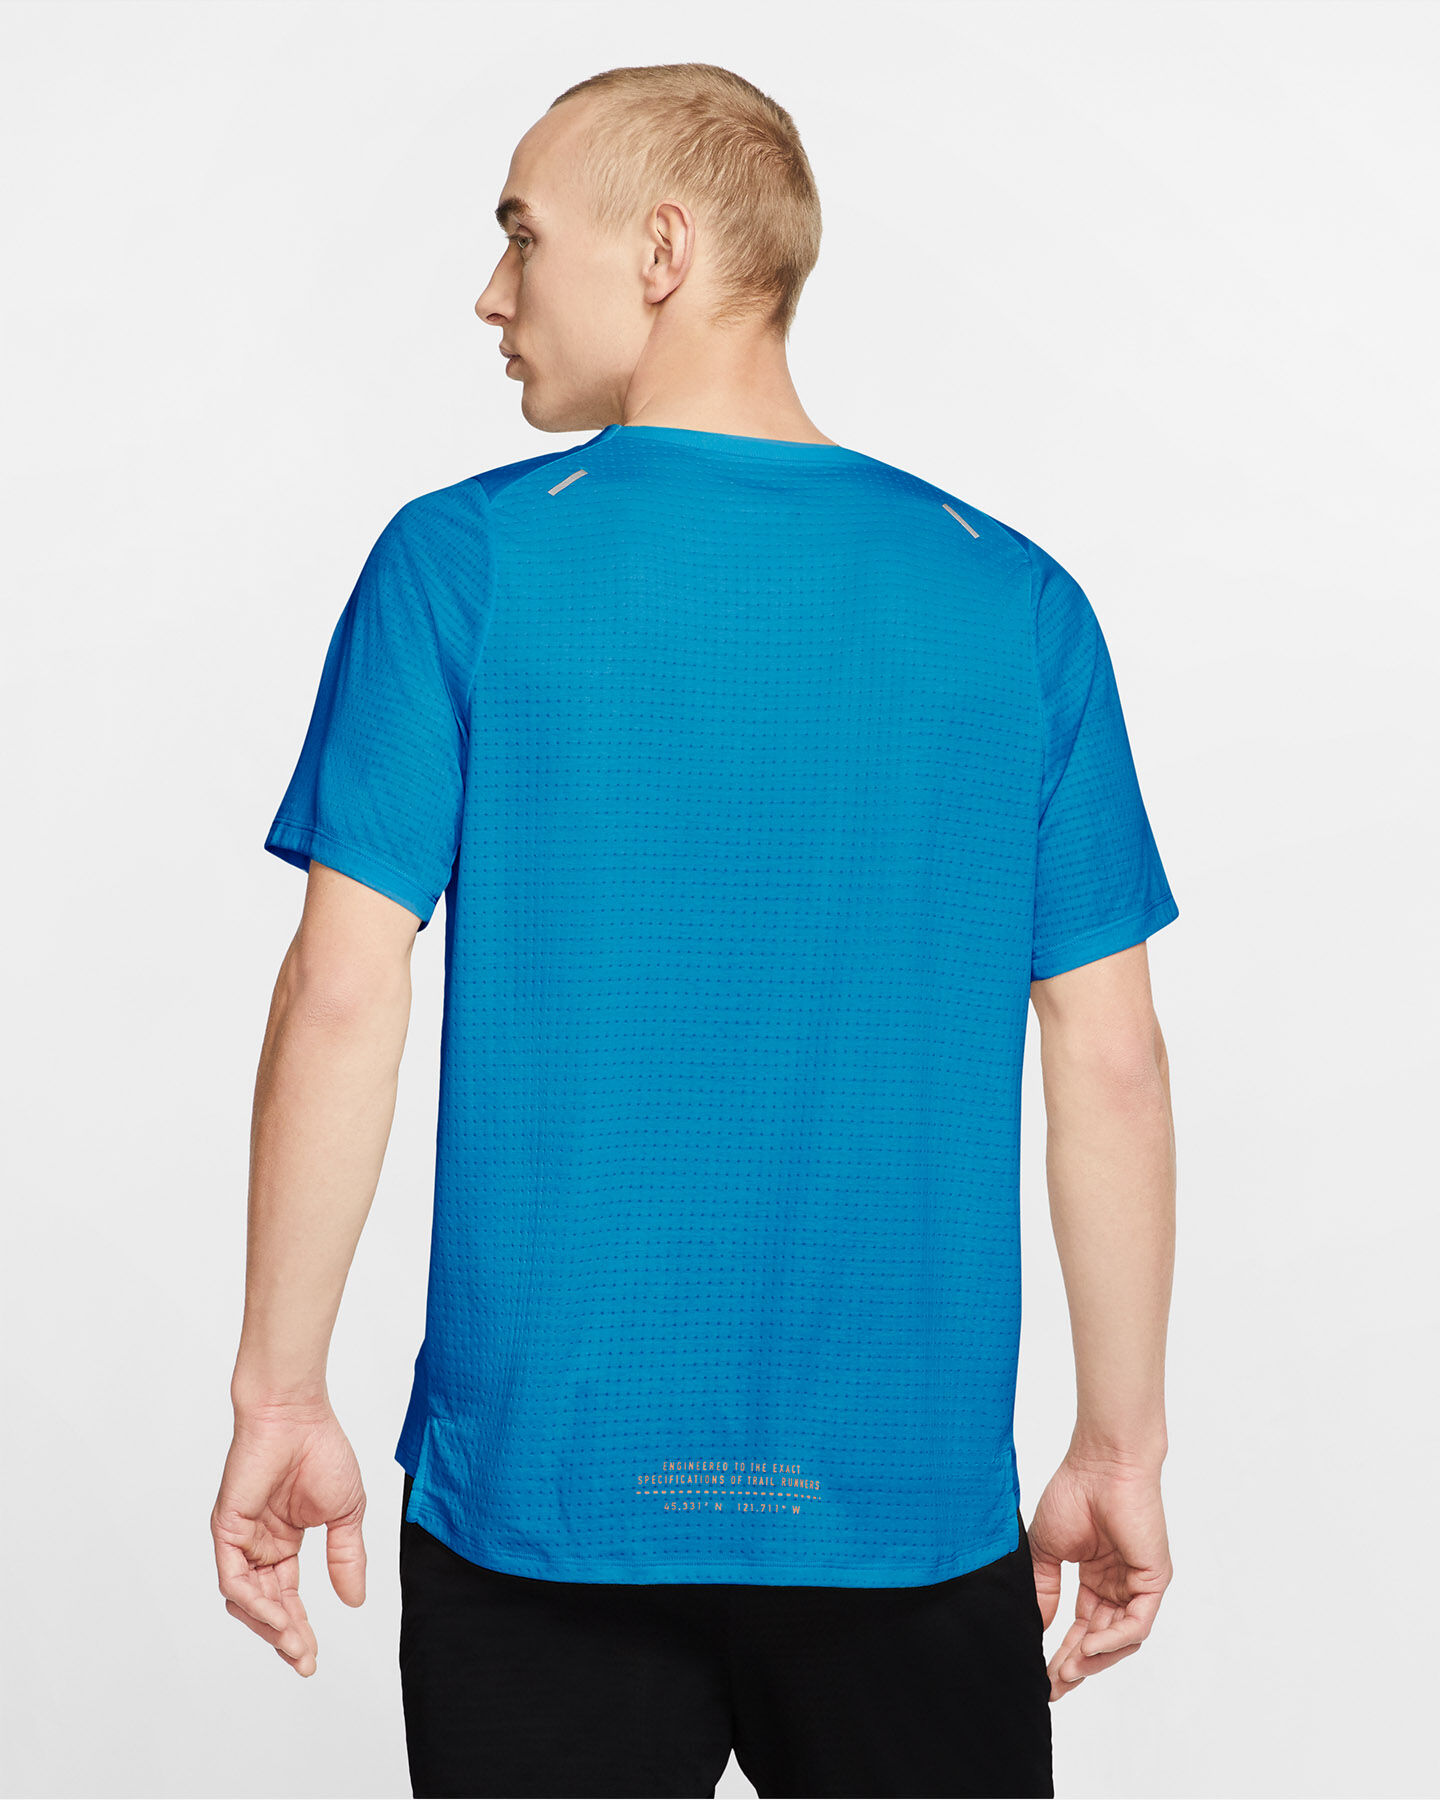  T-Shirt running NIKE RISE 365 TRAIL M S5225209|446|S scatto 3